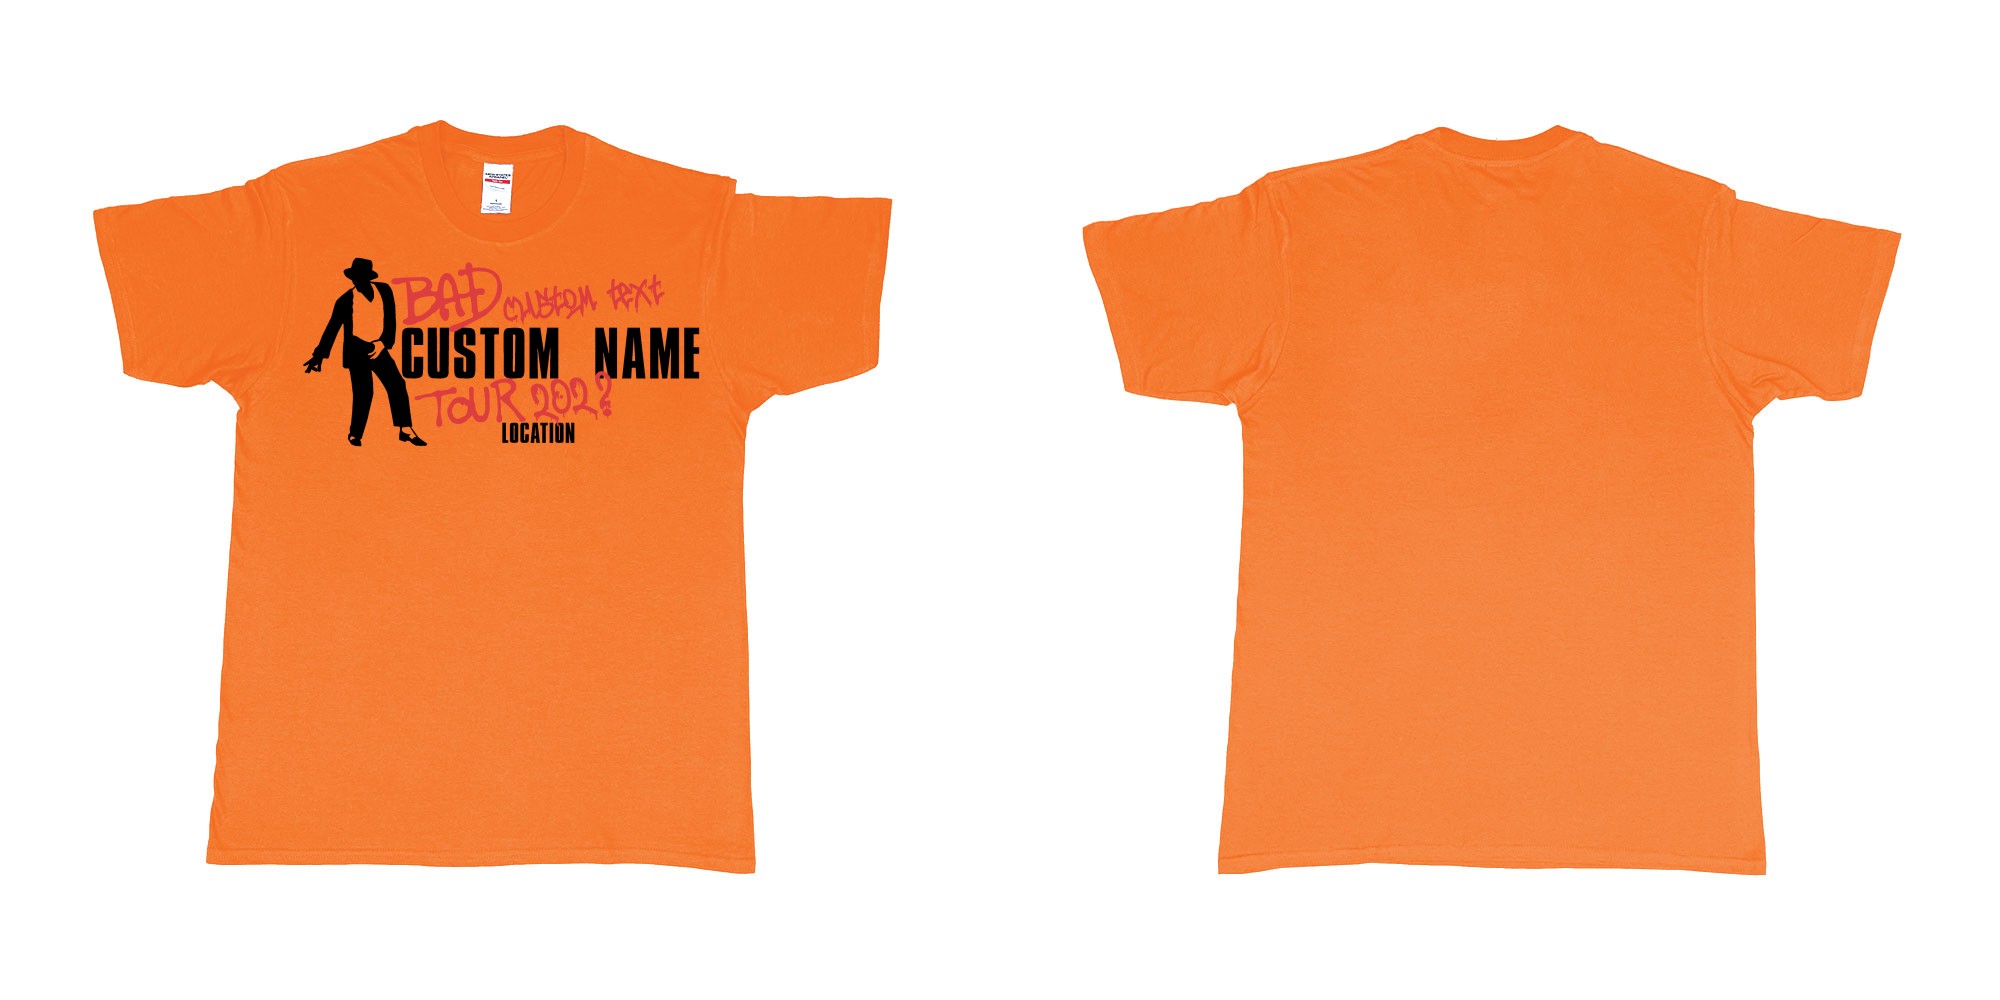 Custom tshirt design michael jackson bad tour custom name year location in fabric color orange choice your own text made in Bali by The Pirate Way